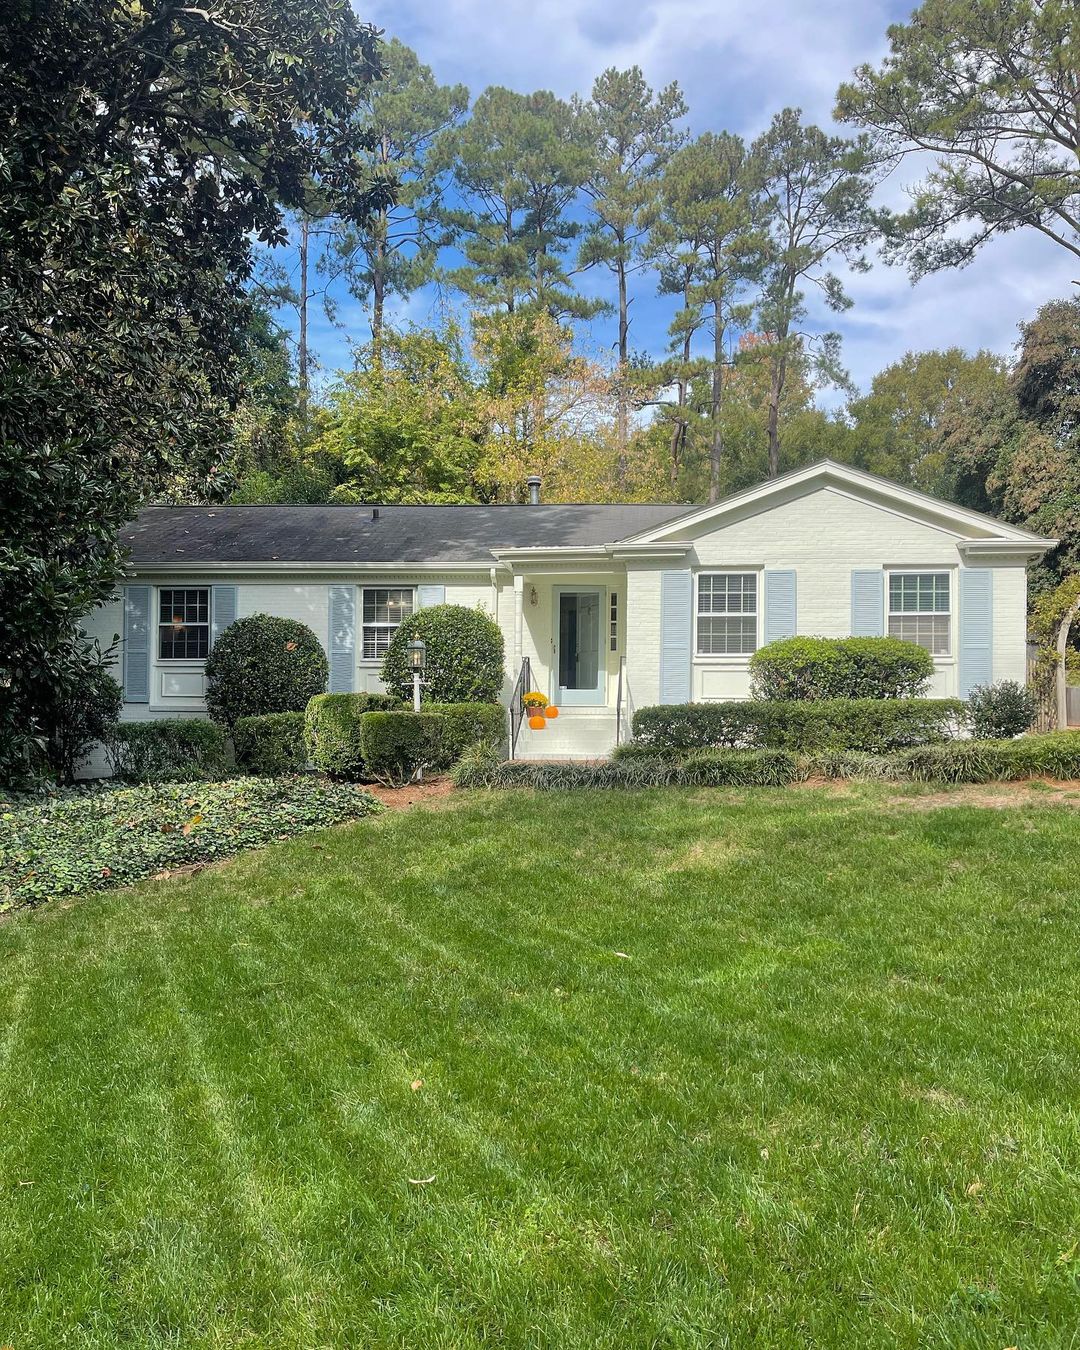 A ranch style home in North Hills, Raleigh with a large manicured lawn. Photo by Instagram user @kathleendlalor.realtor.